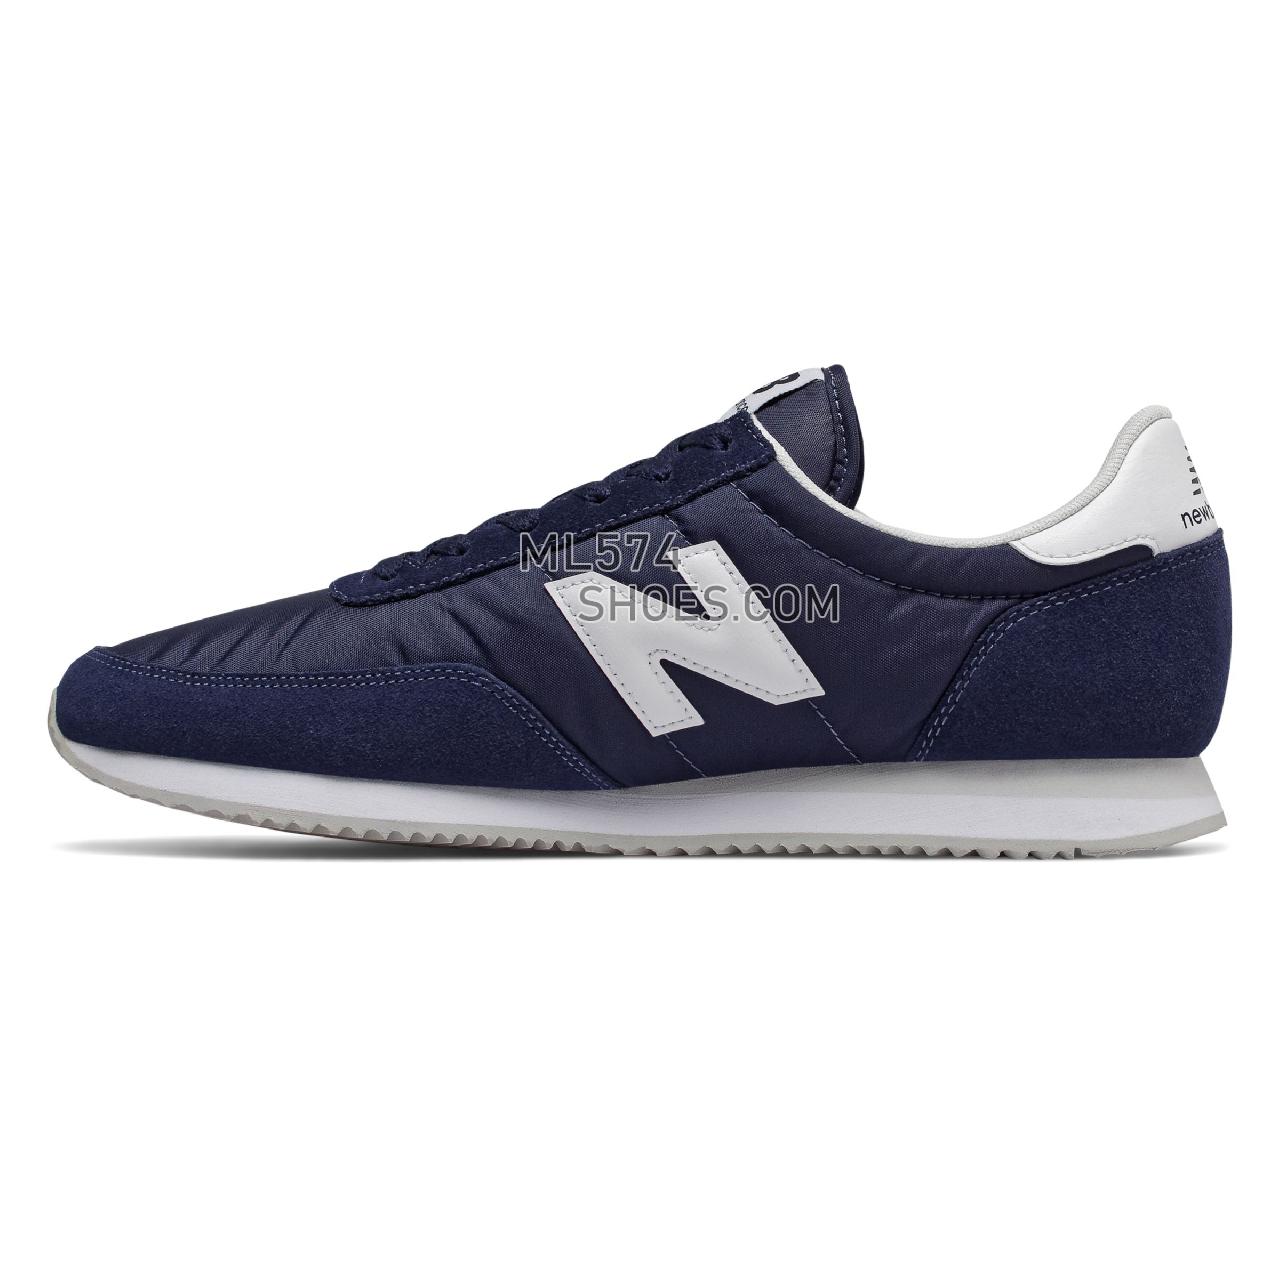 New Balance 720 - Men's 720 Classic - Pigment with White - UL720AB